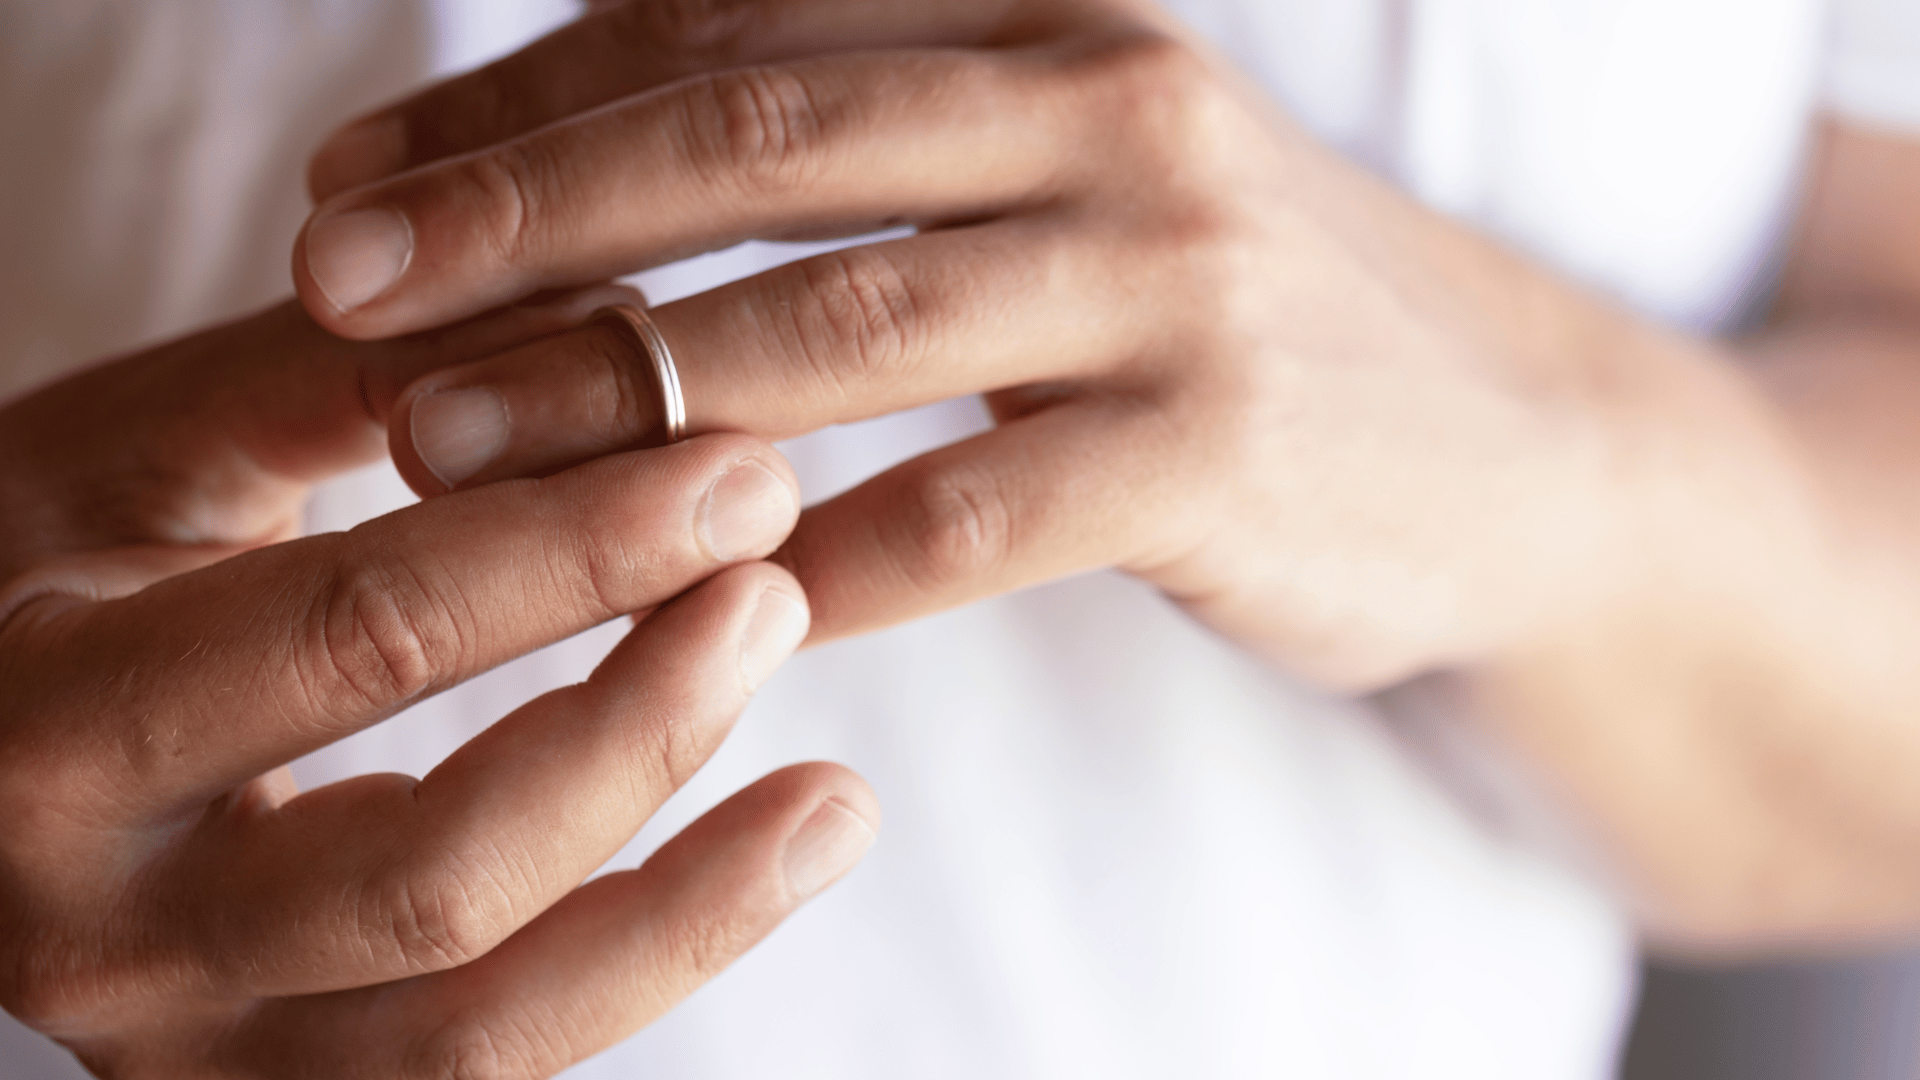 Person's hands removing wedding band to symbolise end of relationship. Family Lawyers Penrith. Family Solicitors Sydney. Family Lawyers Penrith.